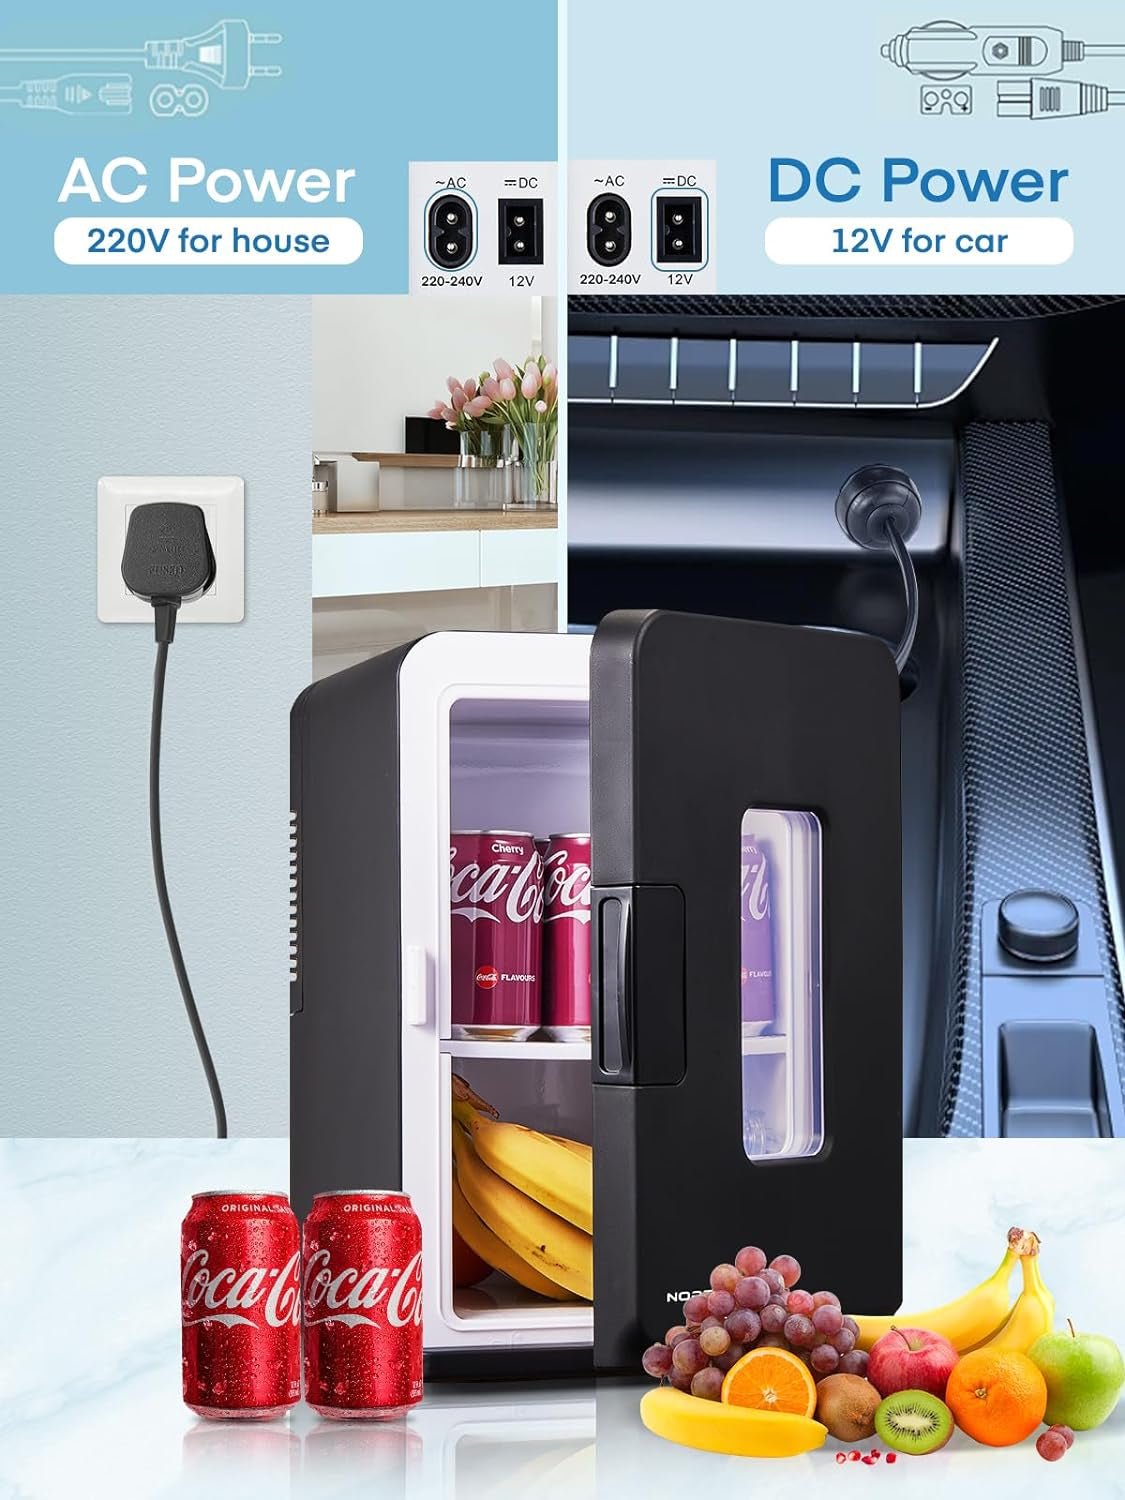 Mini Fridge 15L, 21 Cans Mini Fridges for Bedrooms | AC+12V DC Power Small Fridge for Car, Office, Travel | Max & ECO Mode, Thermoelectric Cooler and Warmer | for Skincare, Beauty, Drinks